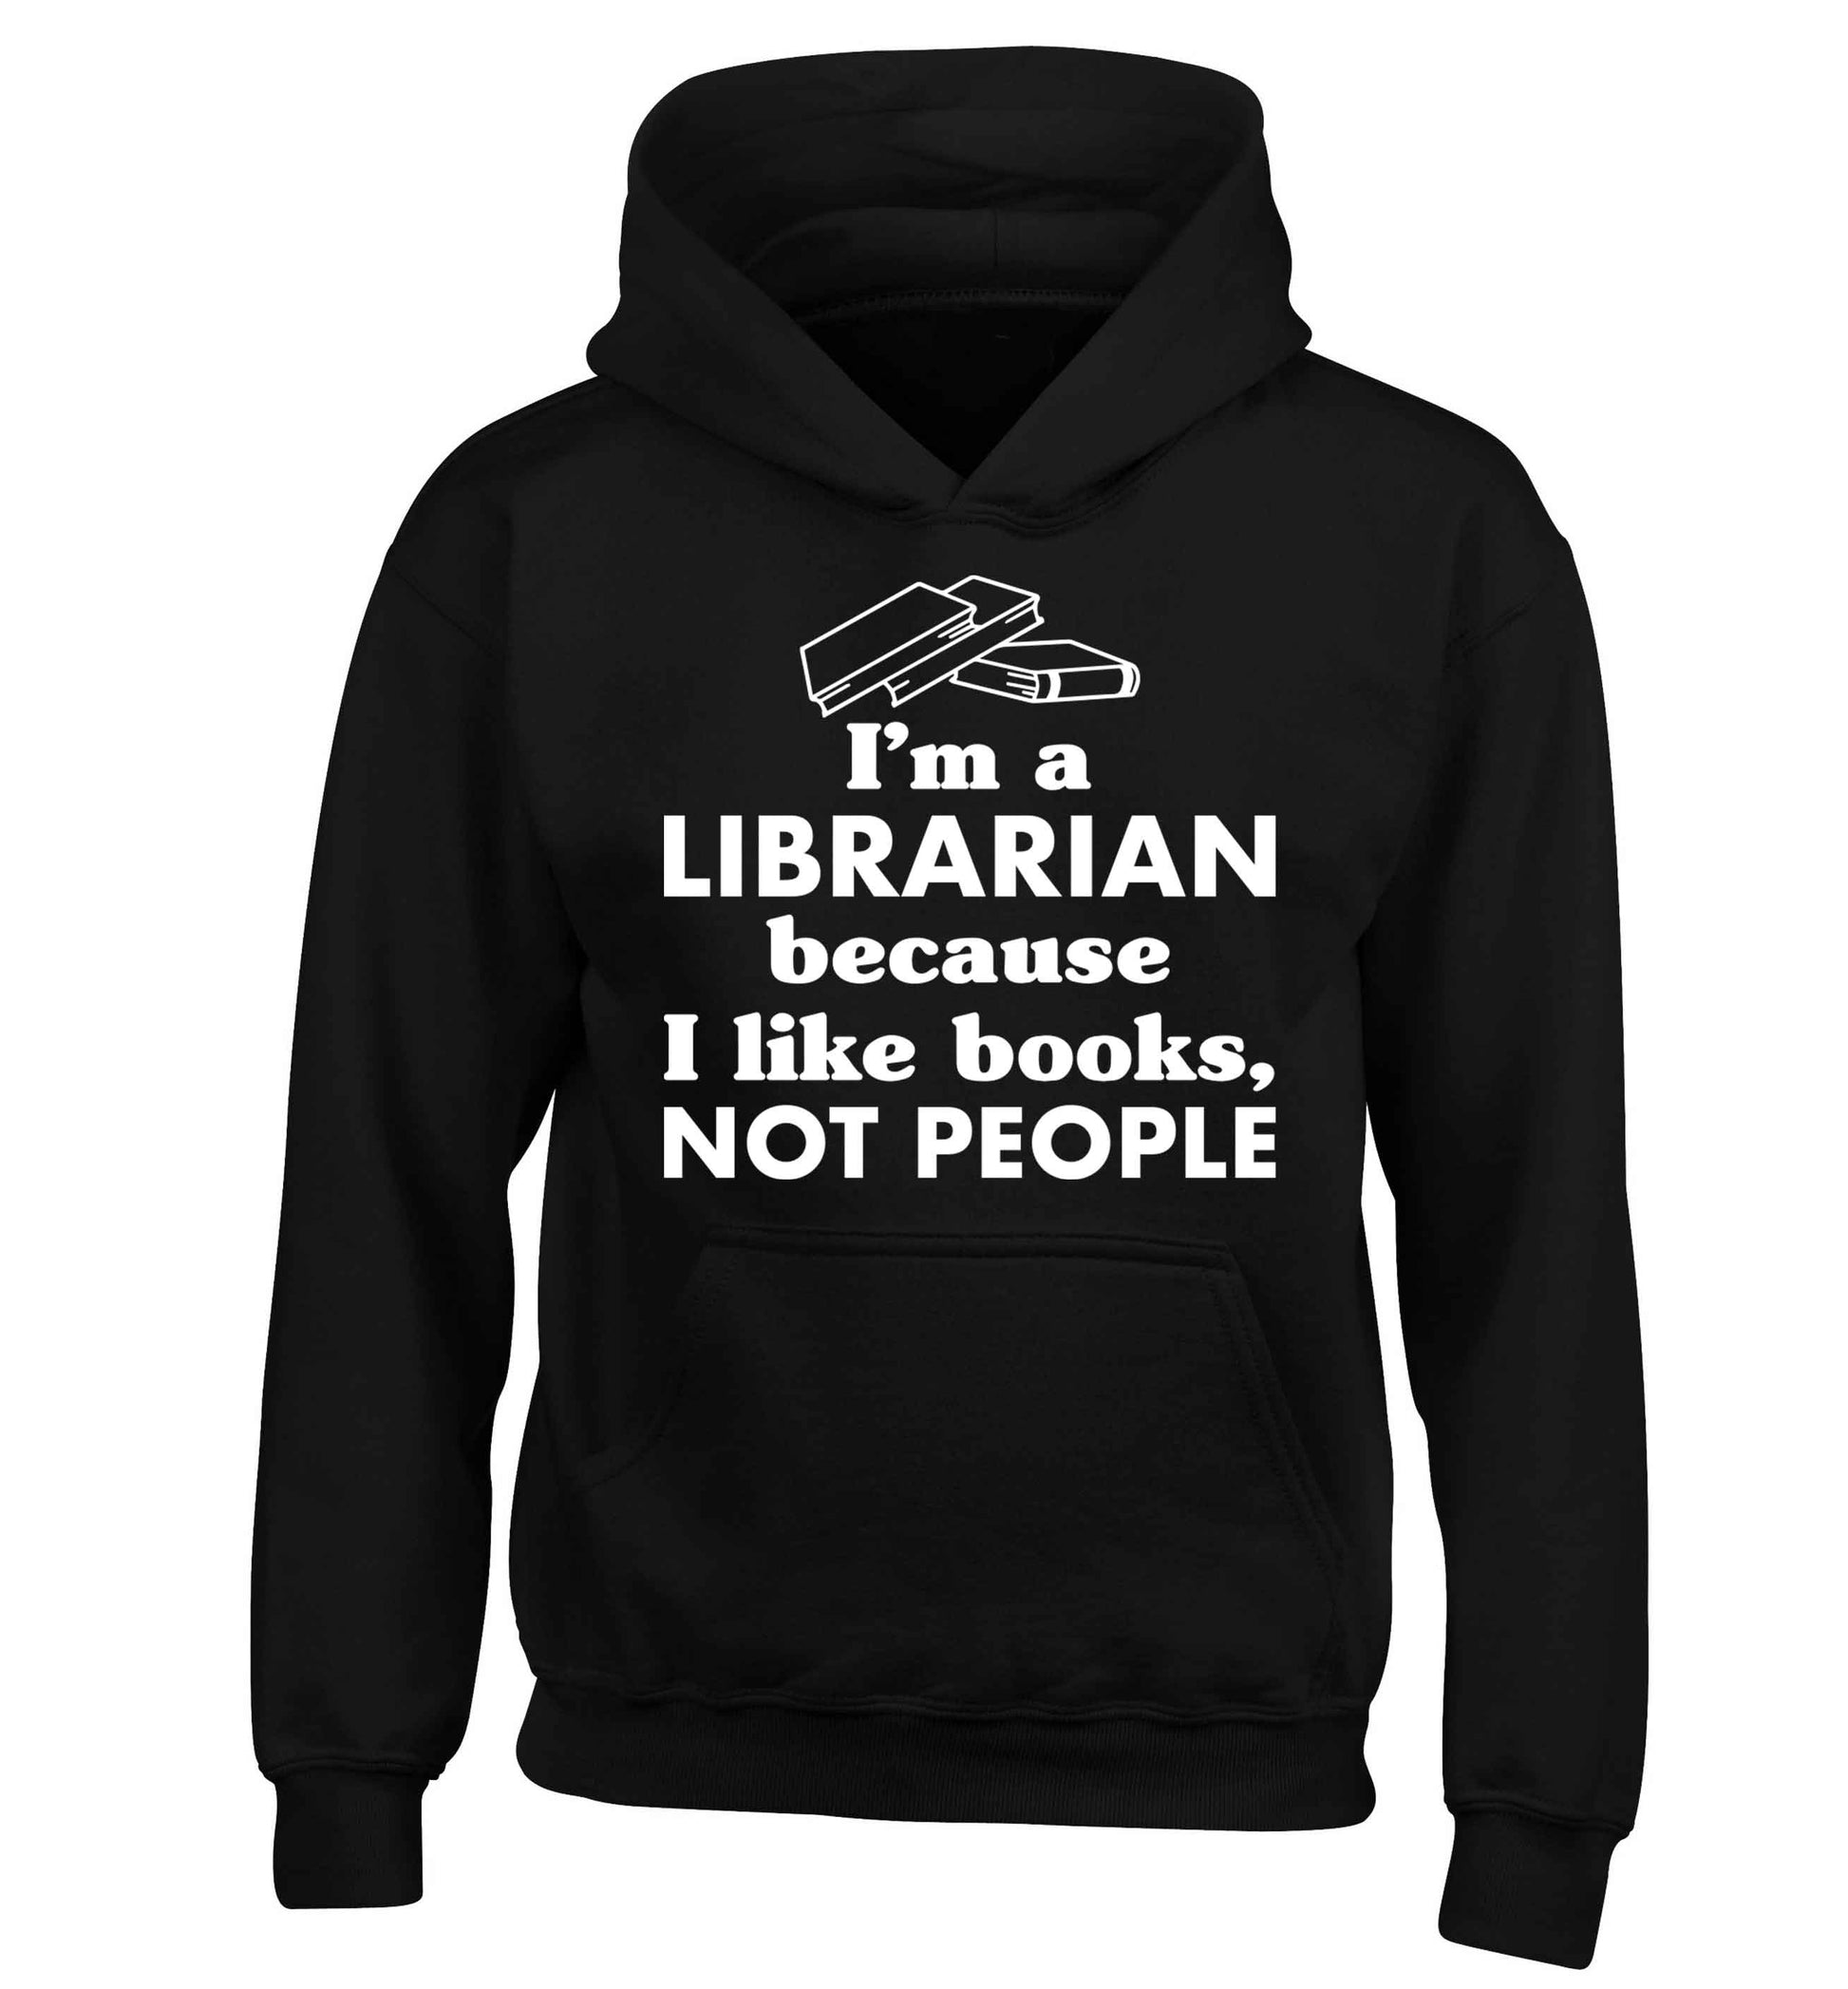 I'm a librarian because I like books not people children's black hoodie 12-13 Years